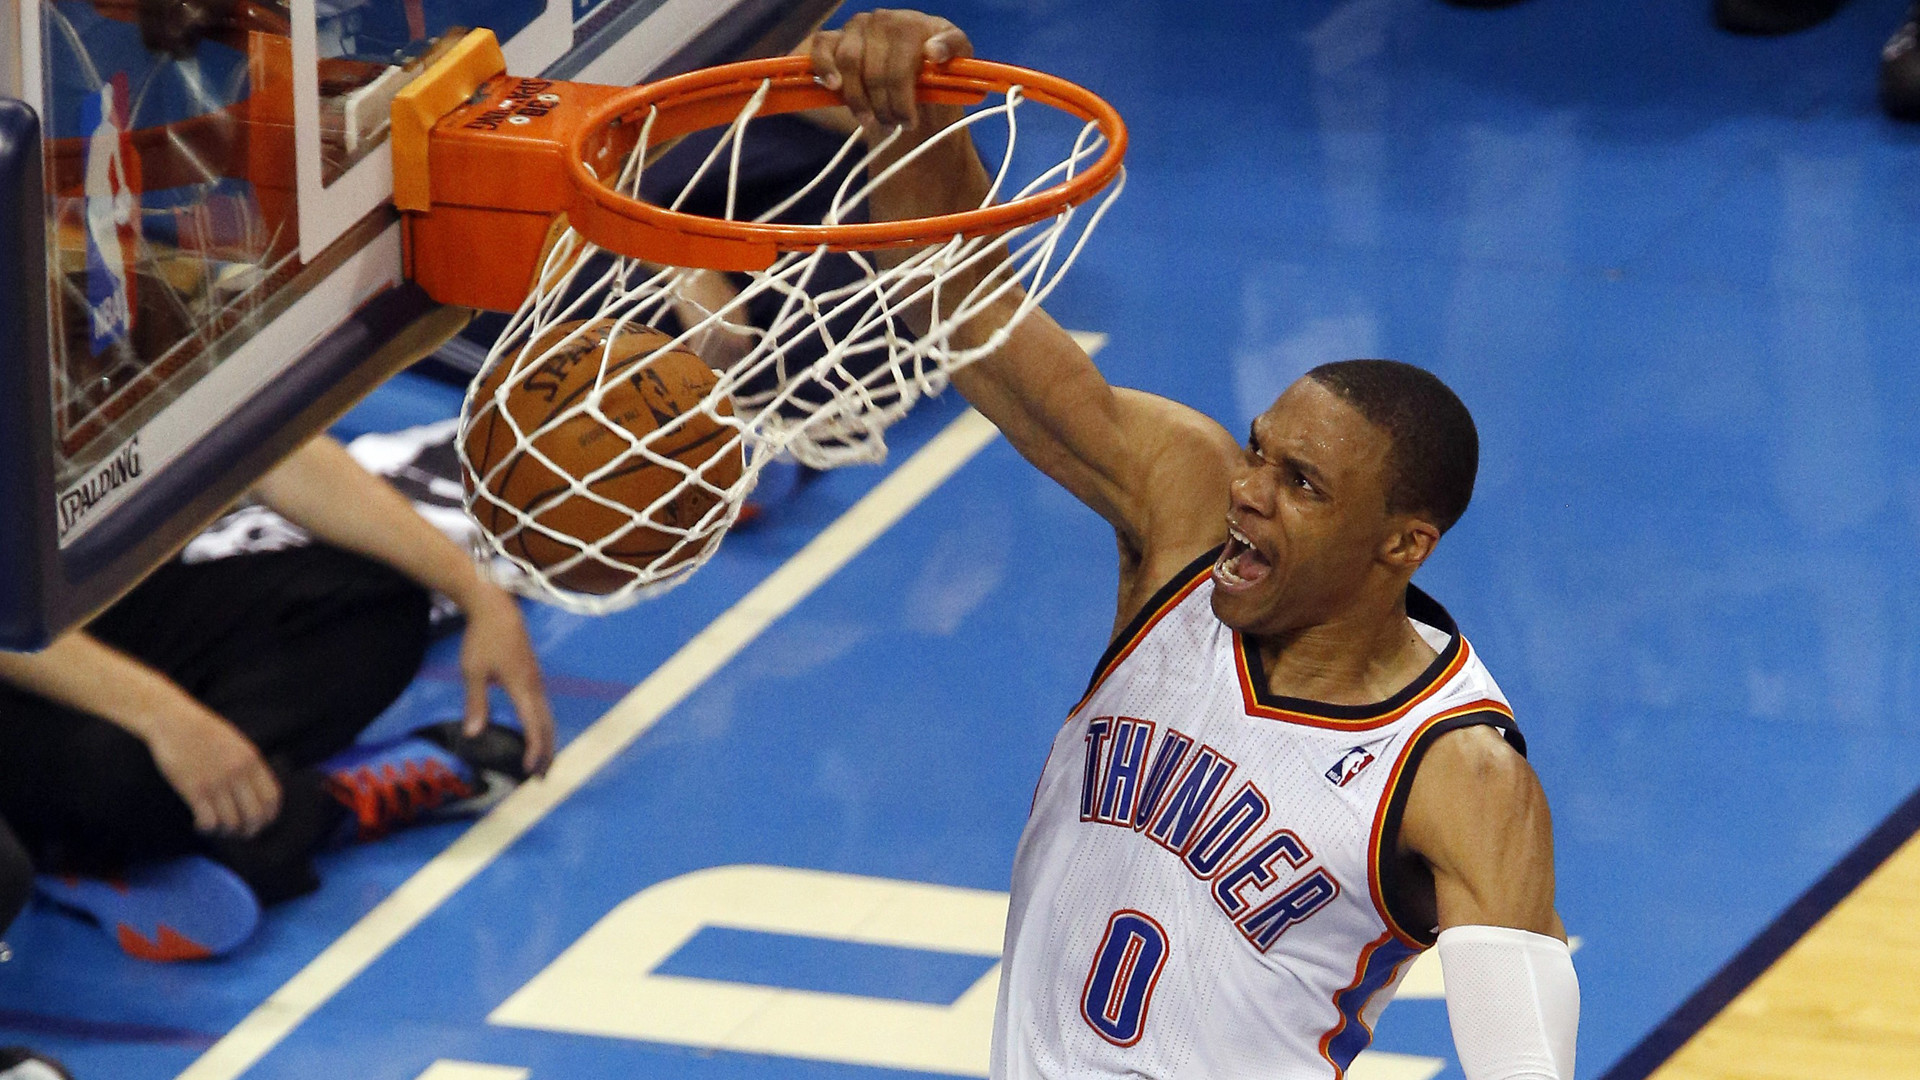 HD Russell Westbrook Wallpapers HdCoolWallpapers.Com